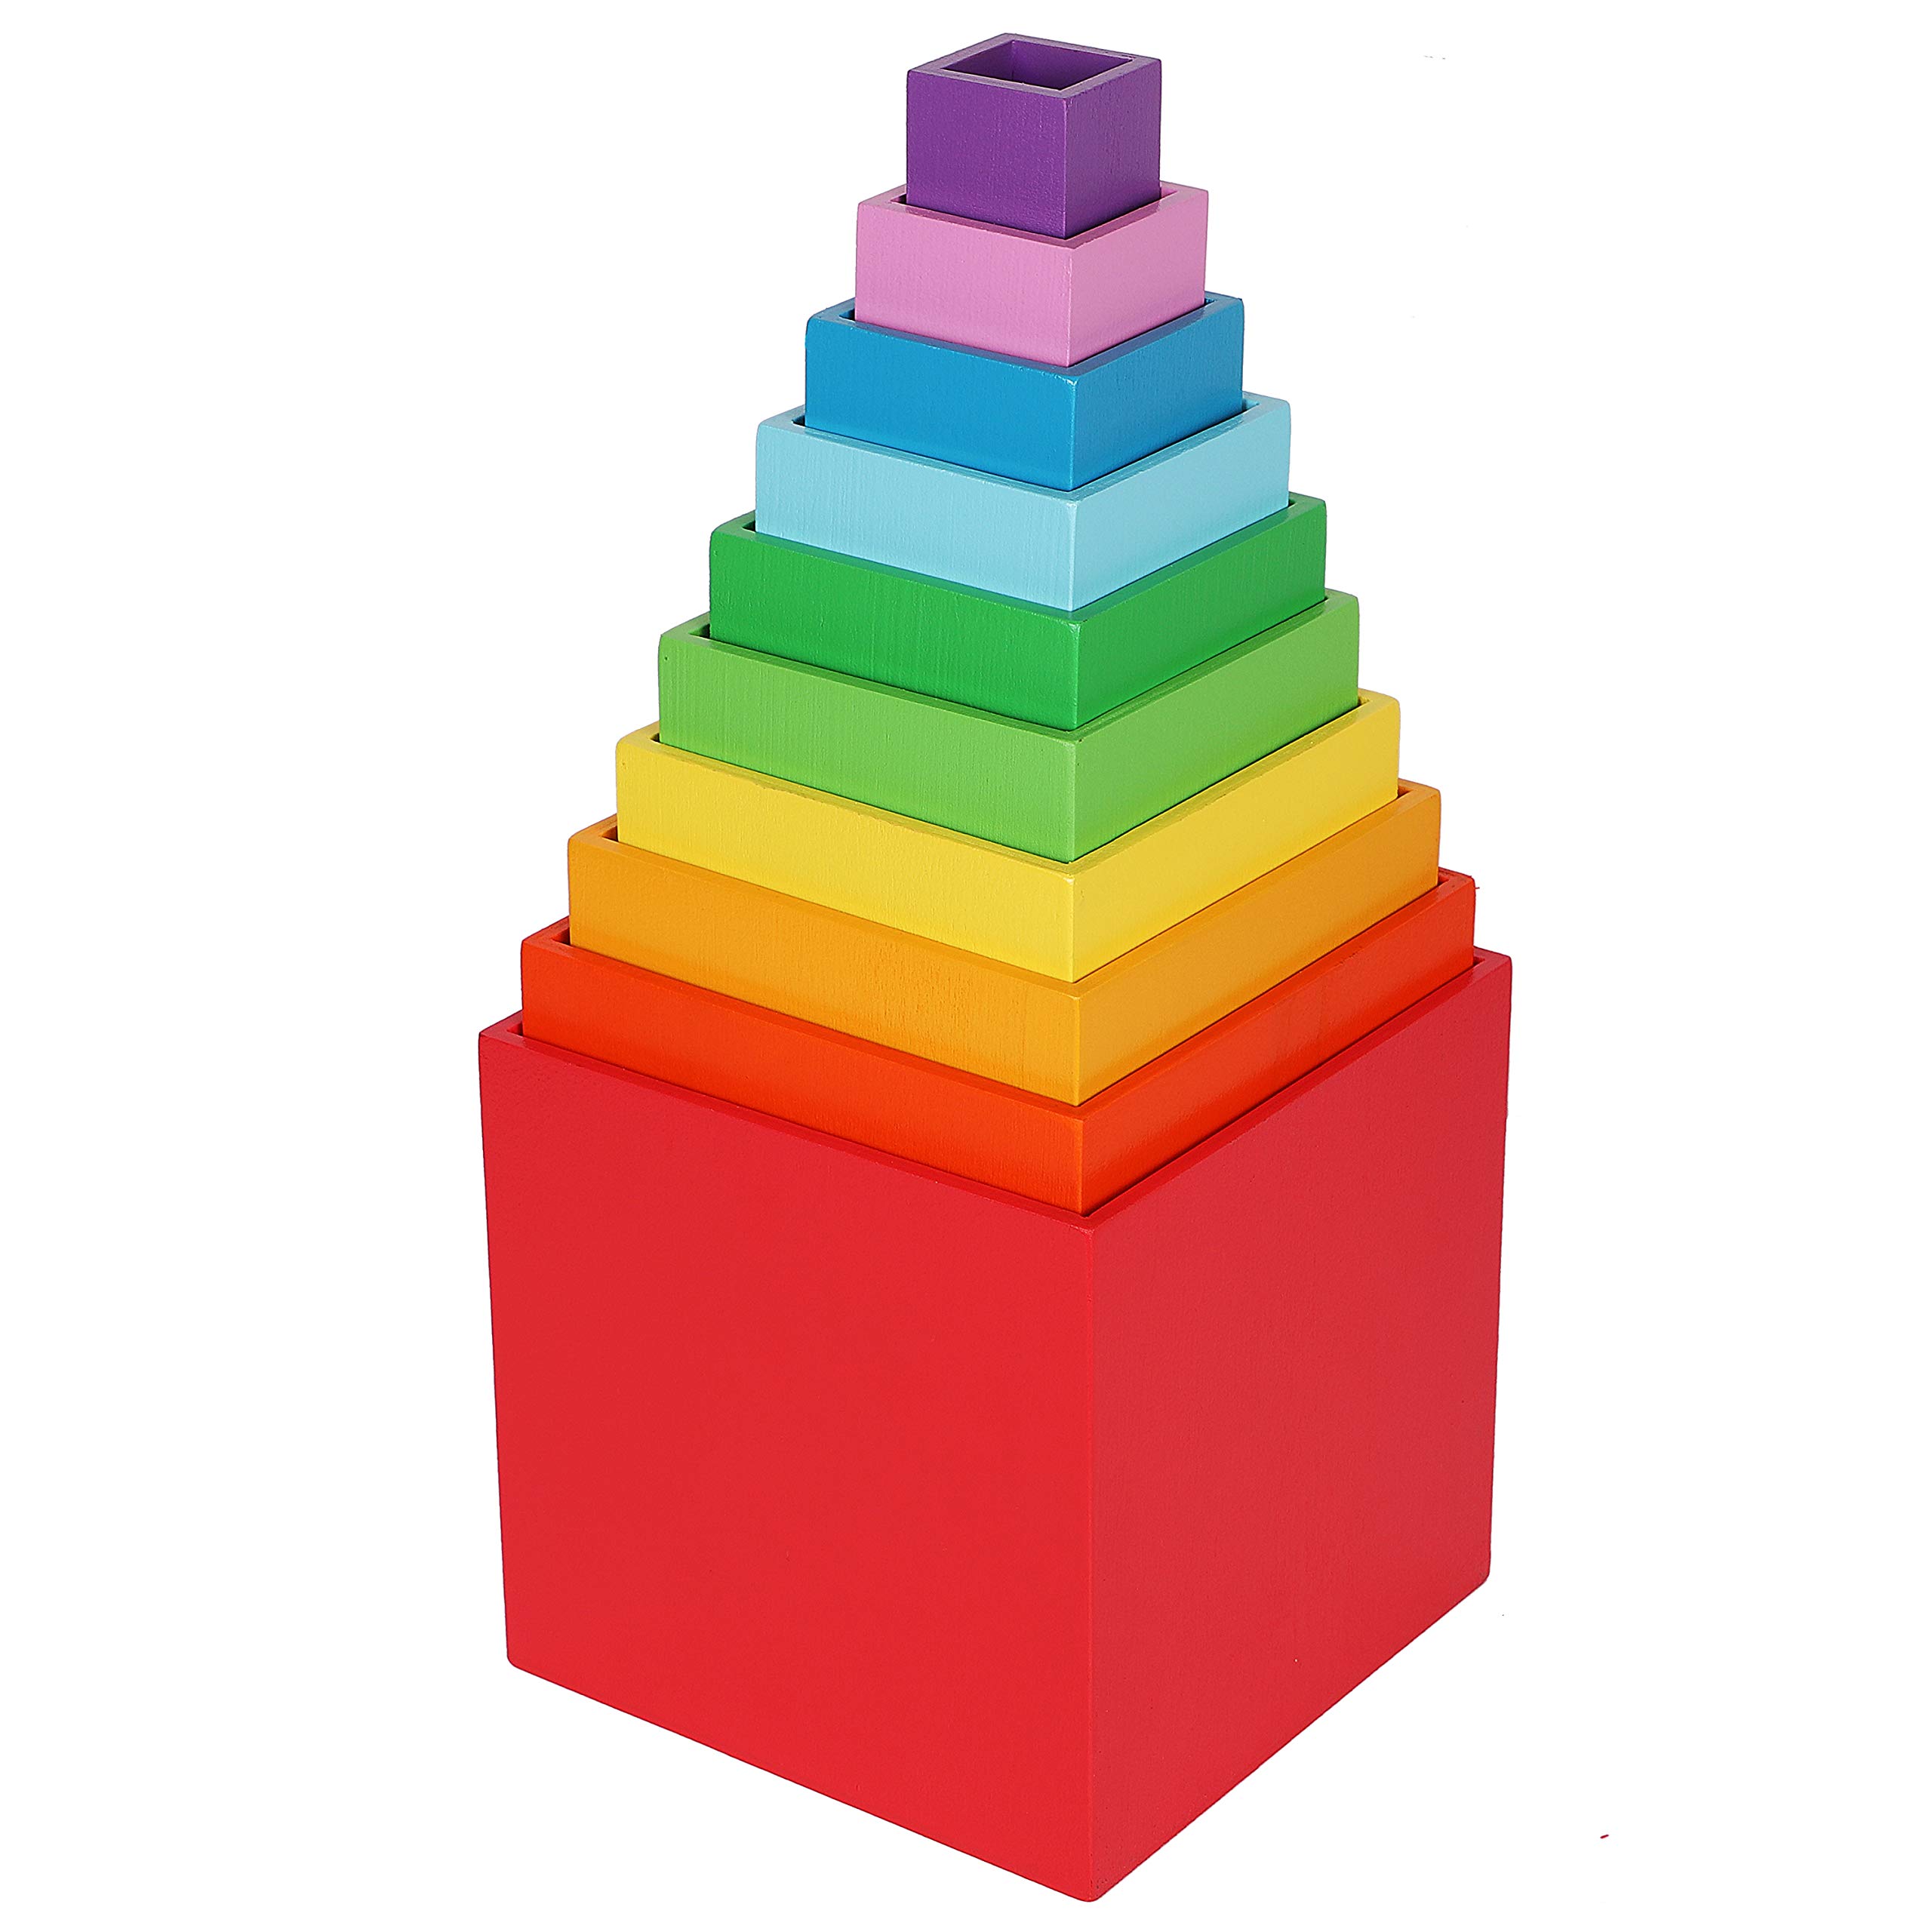 TOWO Wooden Stacking Boxes Rainbow Colours-Nesting and Sorting Cups Blocks for Toddlers-Stacking Cubes Educational Learning Toys for 2 Years Old Montessori Materials